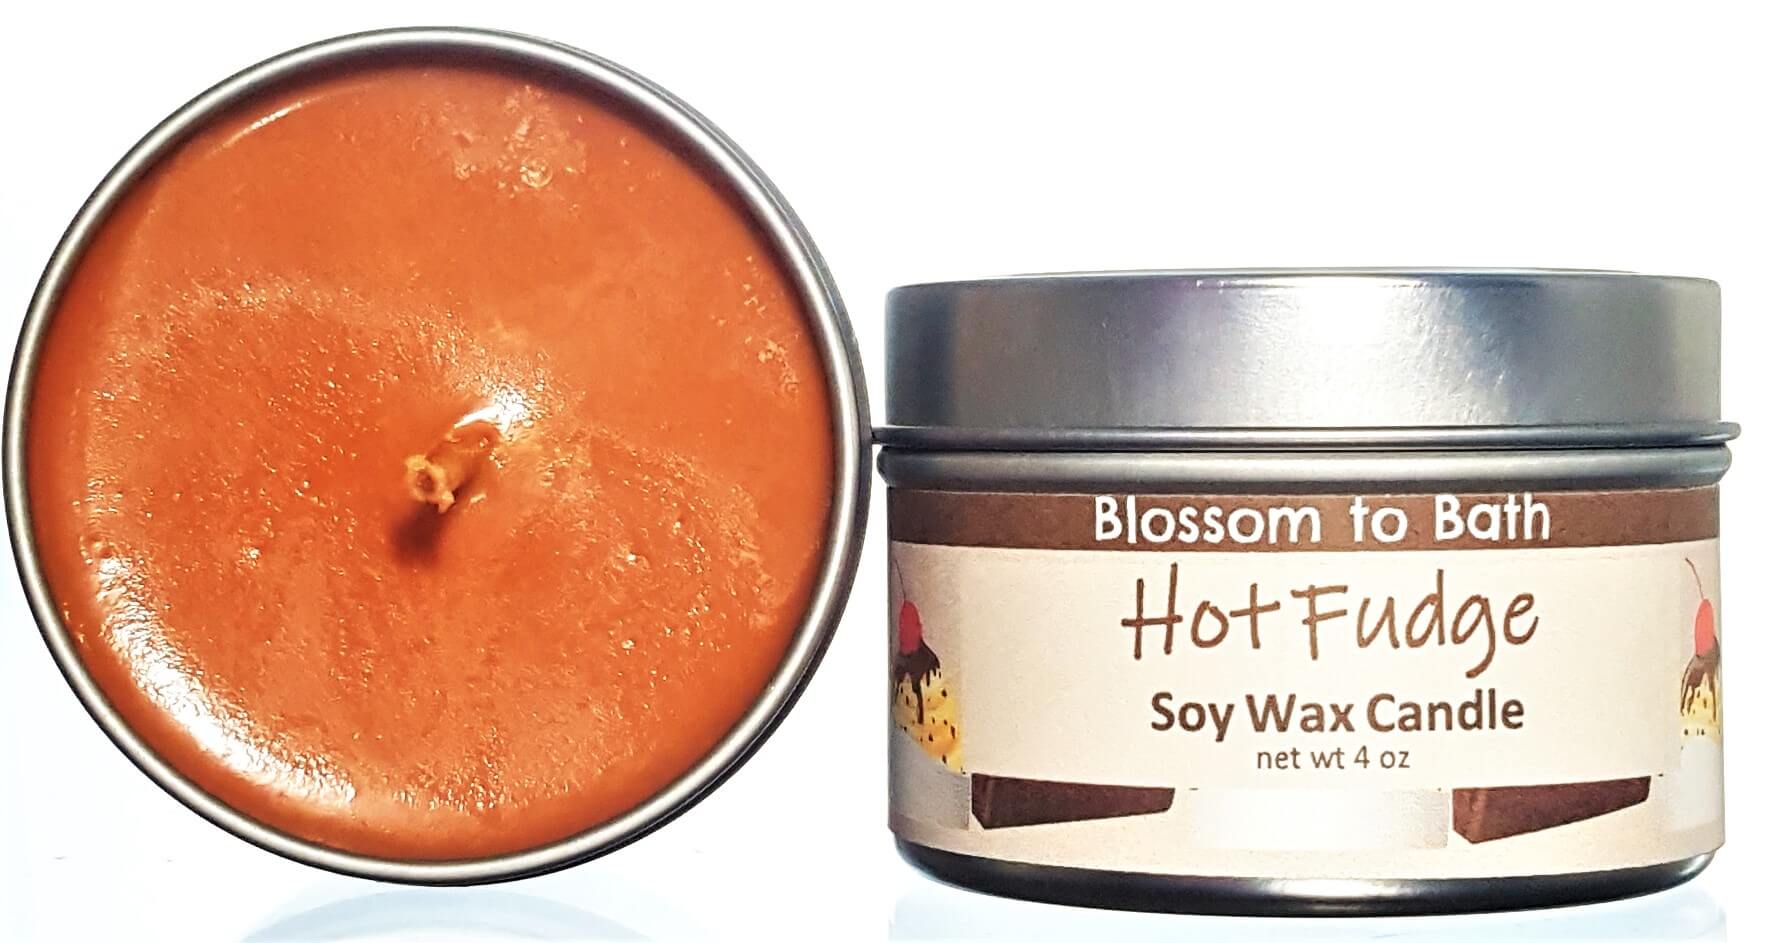 Buy Blossom to Bath Hot Fudge Soy Wax Candle from Flowersong Soap Studio.  Fill the air with a charming fragrance that lasts for hours  The fragrance is three layers deep in rich chocolate.